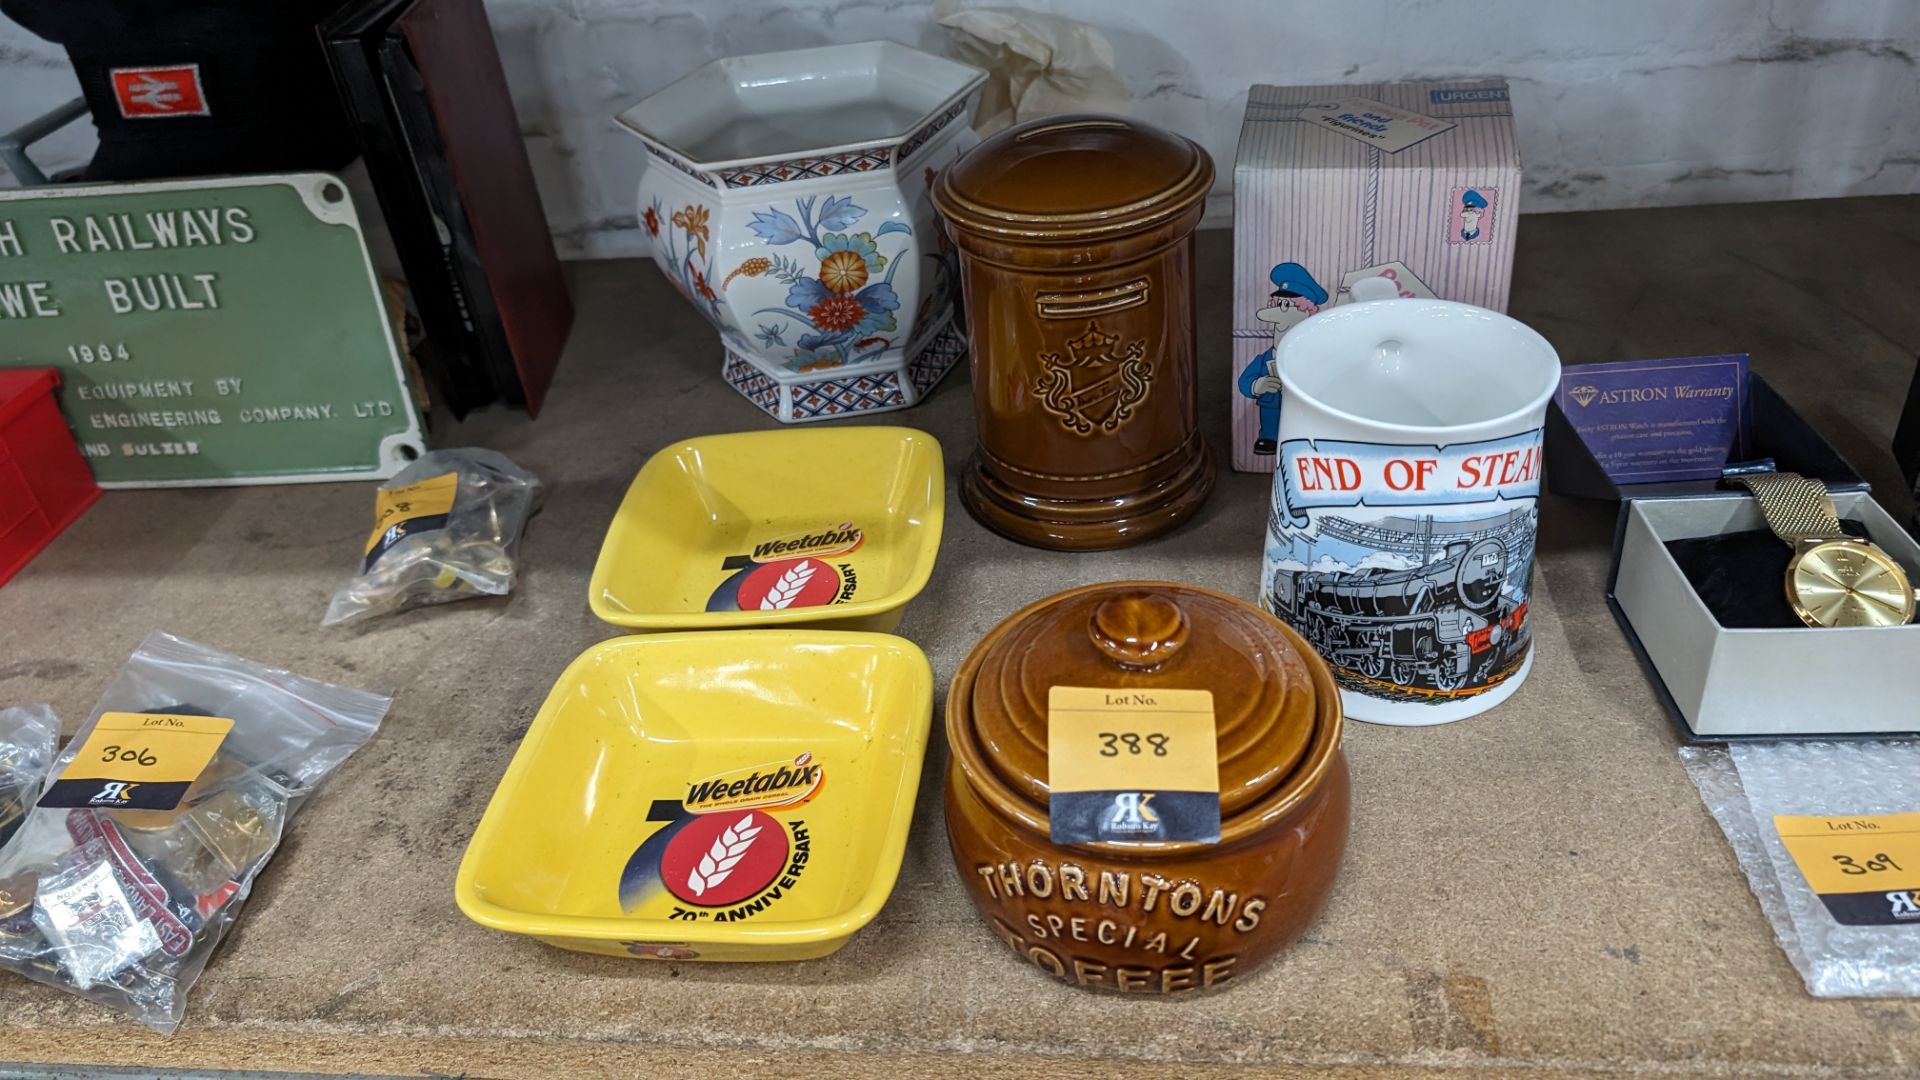 Mixed ceramic/pottery lot comprising bowls, tankards & more, relating to Thorntons, Weetabix, Postma